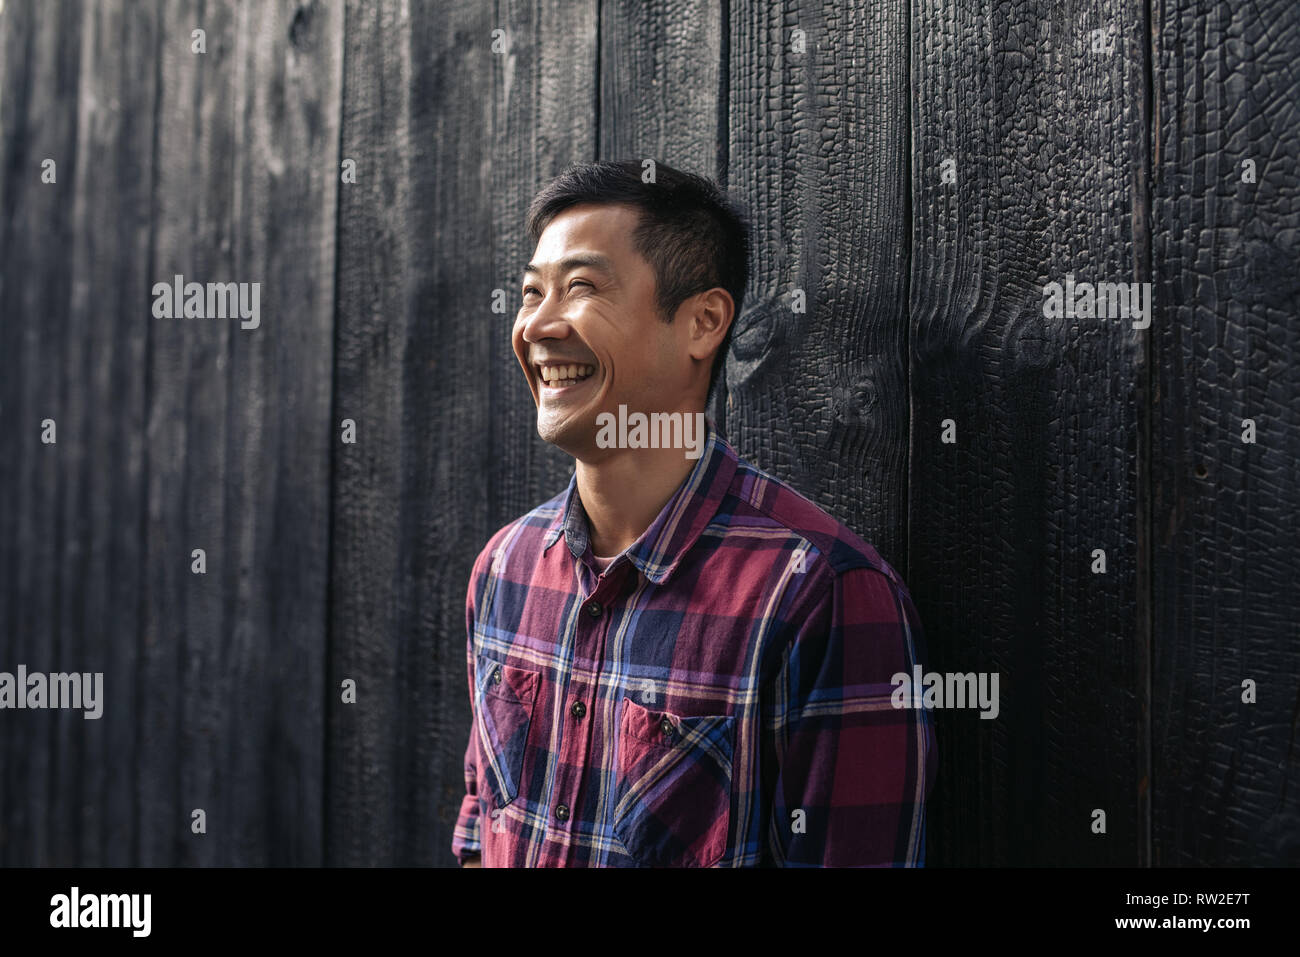 Laughing Asian man leaning against a wall in the city Stock Photo